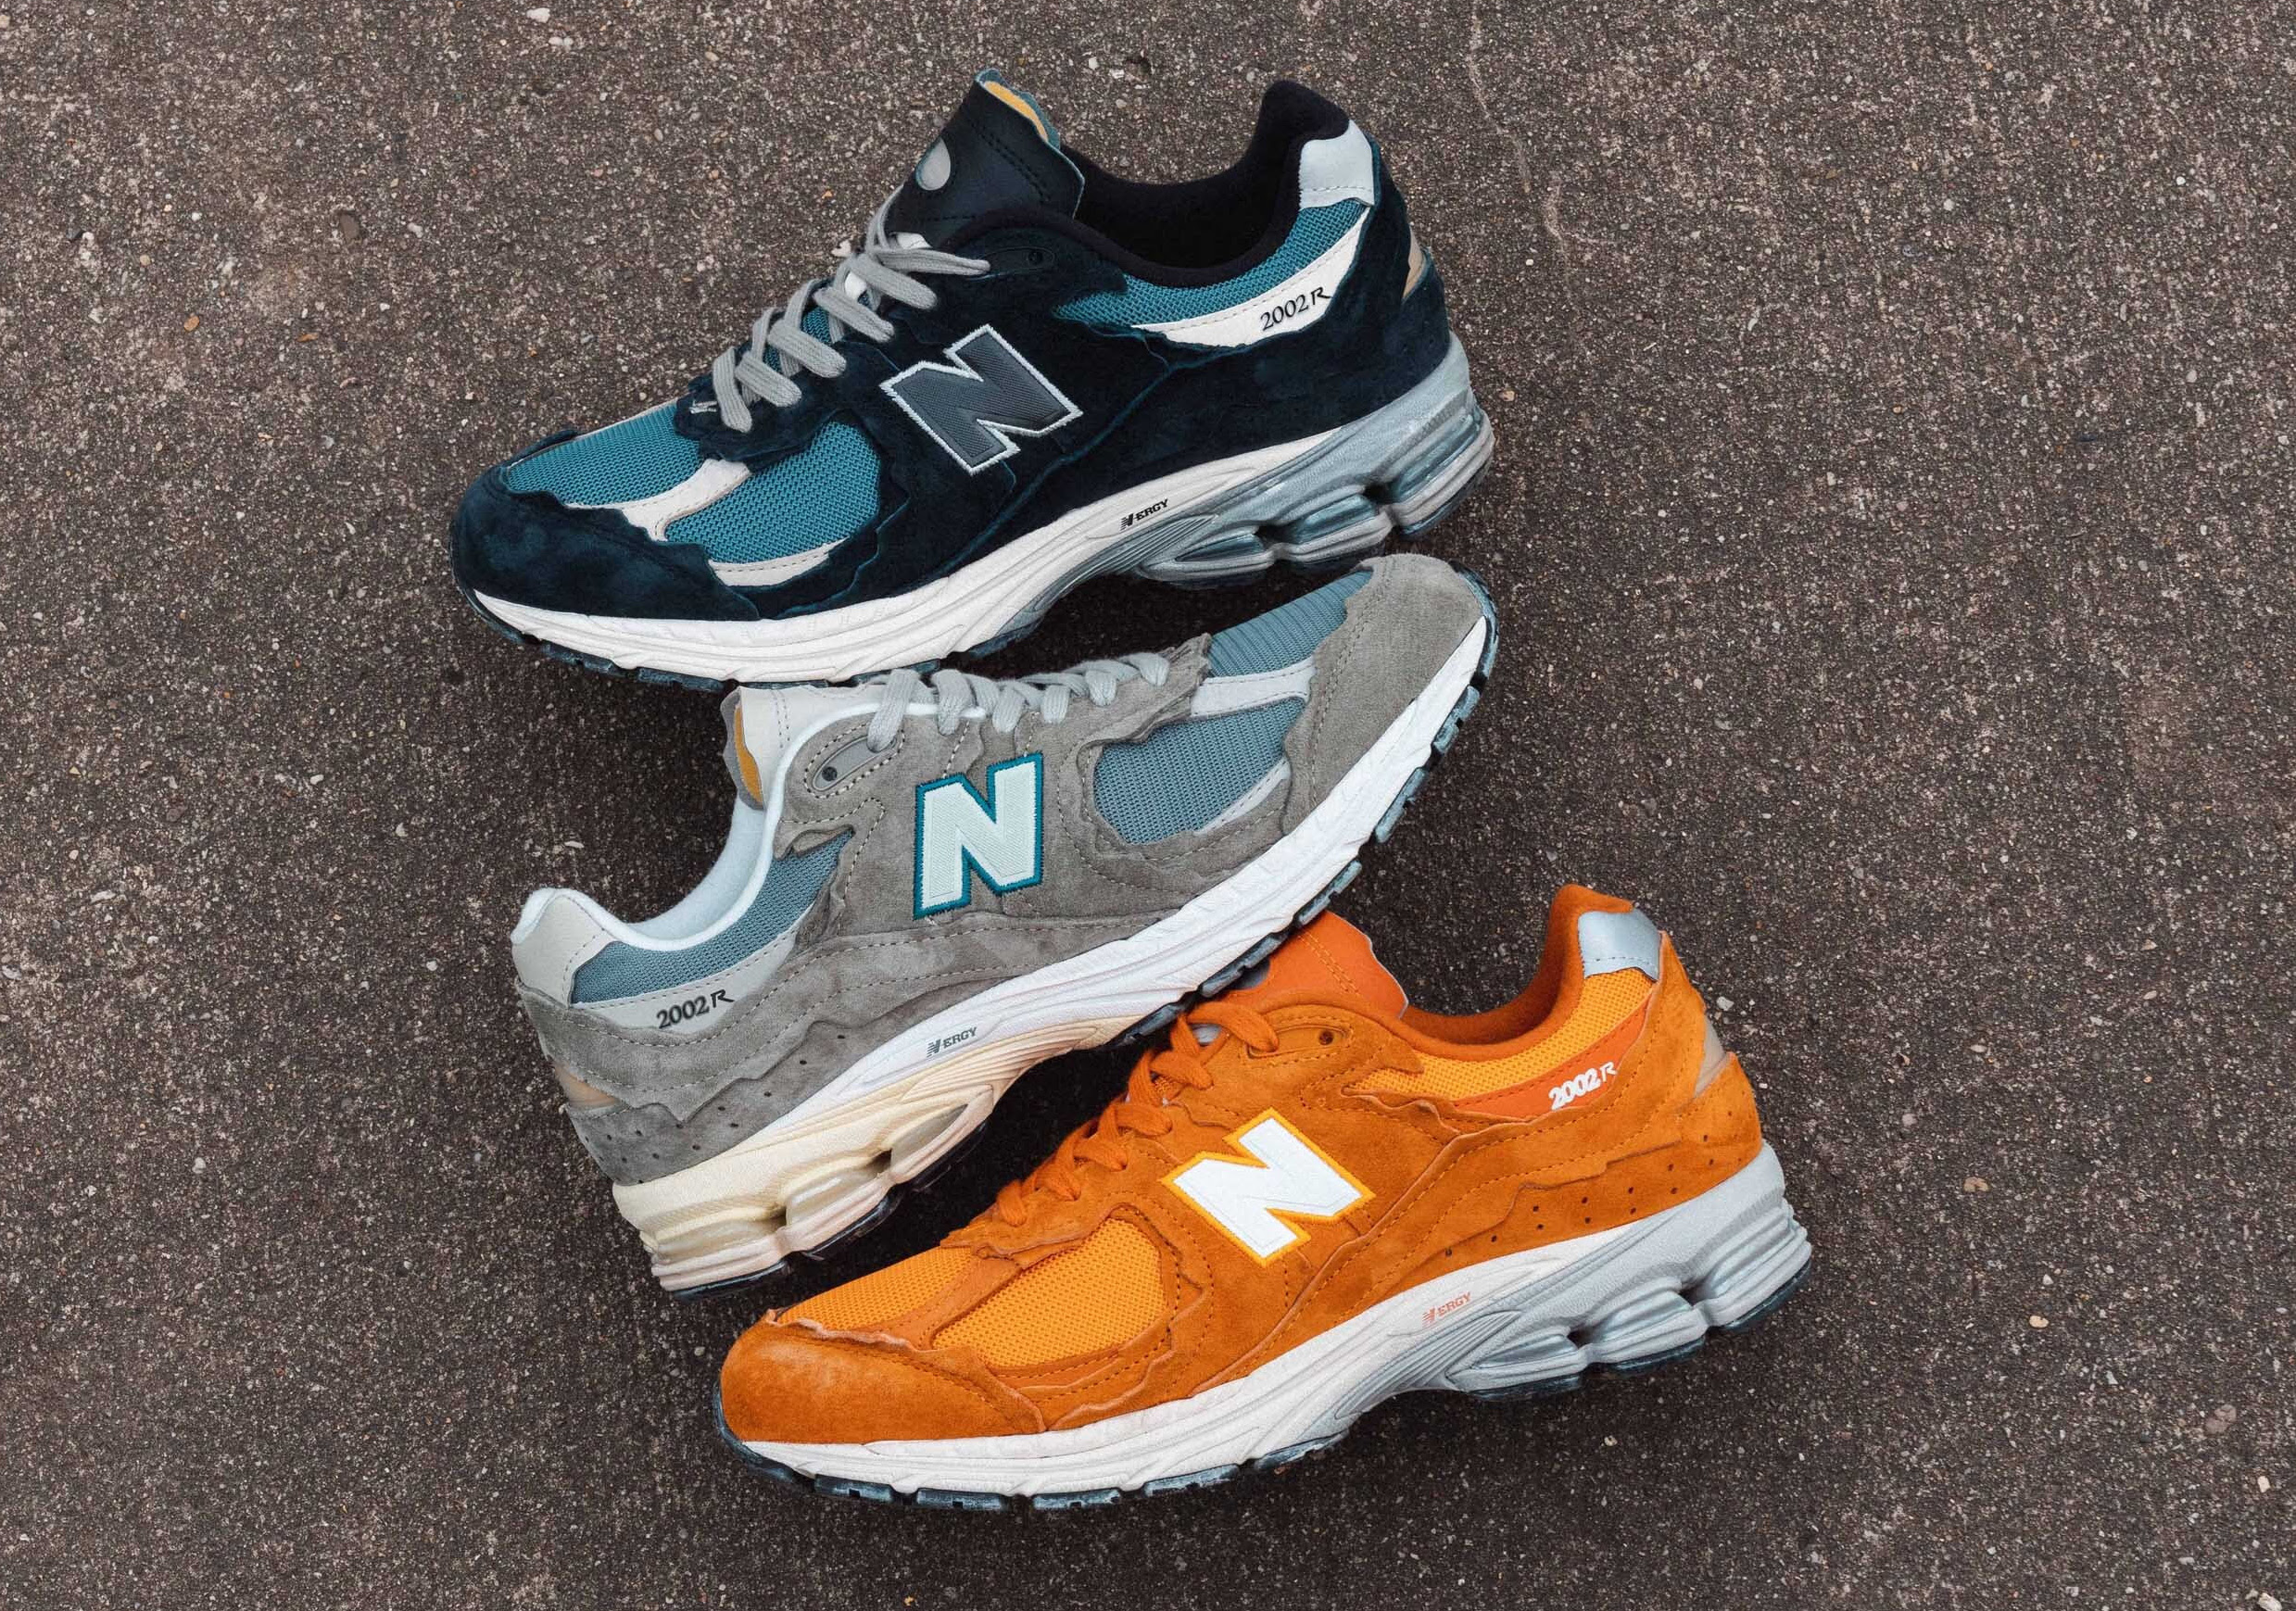 New Balance 2002R Protection Pack 2022 Release Date | SBD